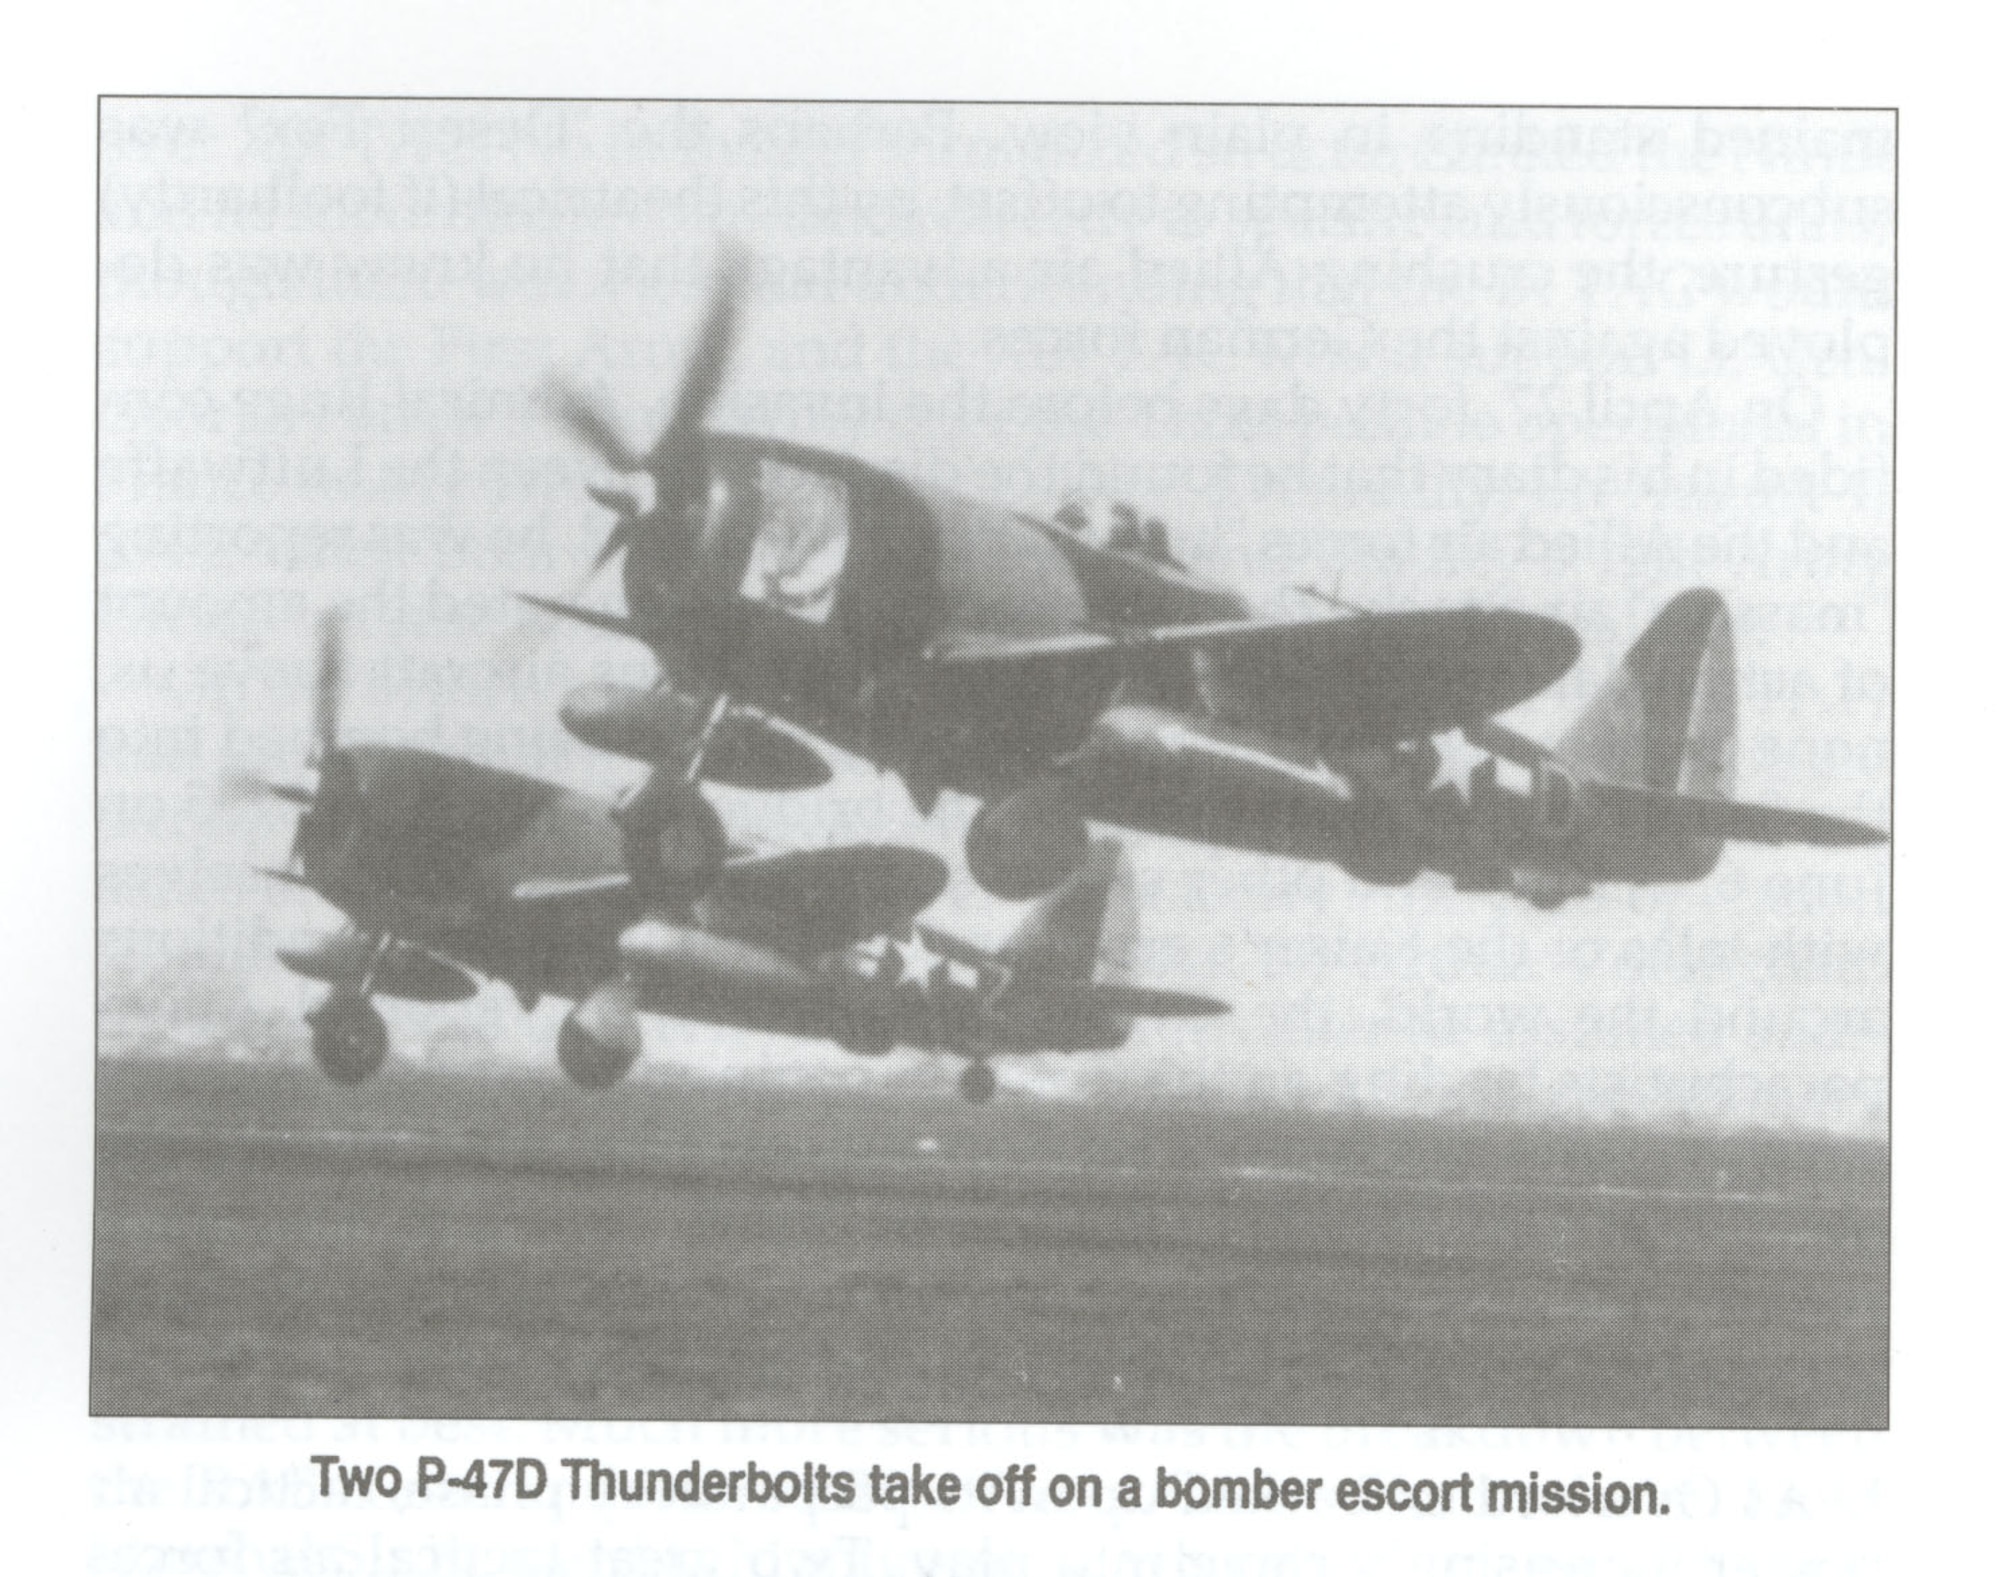 P-47 Thunderbolts on a bomber escort mission.